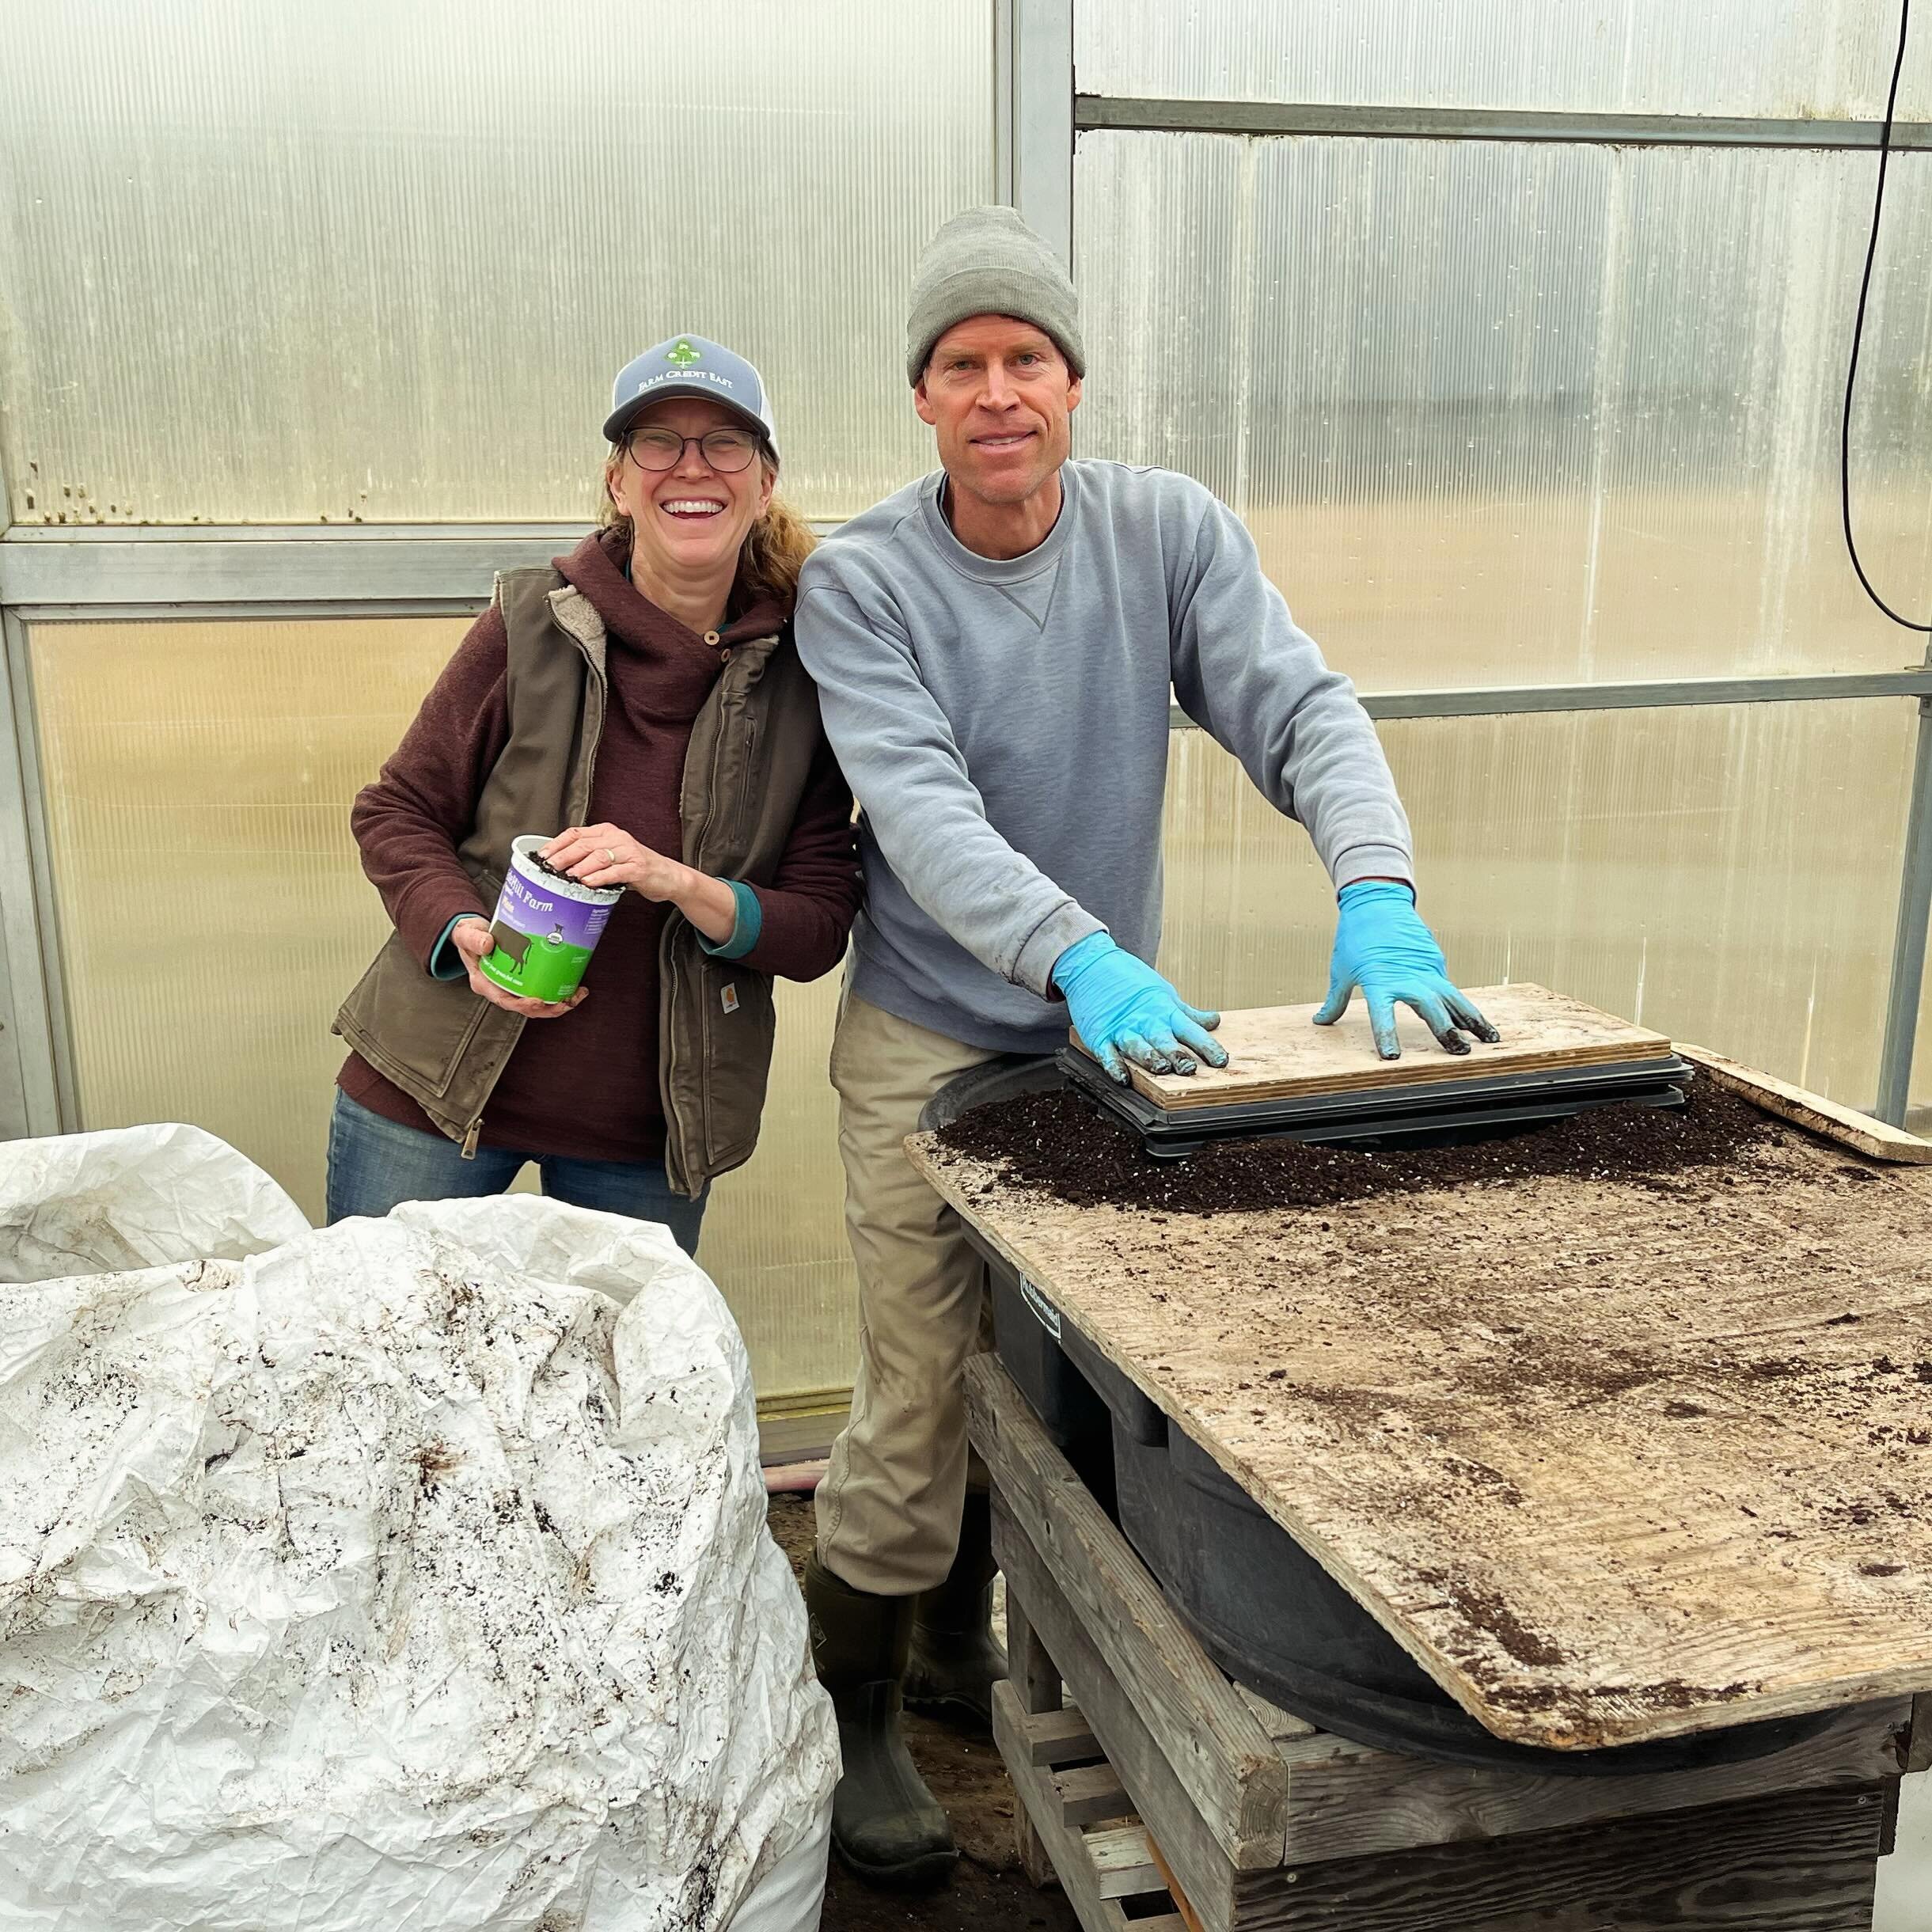 Greenhouse work has begun!  Onions, scallions, and some long-season crops like haba&ntilde;eros are all happily tucked into the soil and getting ready to sprout.  Spring is around the corner&hellip;

#seeding #greenhouse #organic #certifiedorganic #r